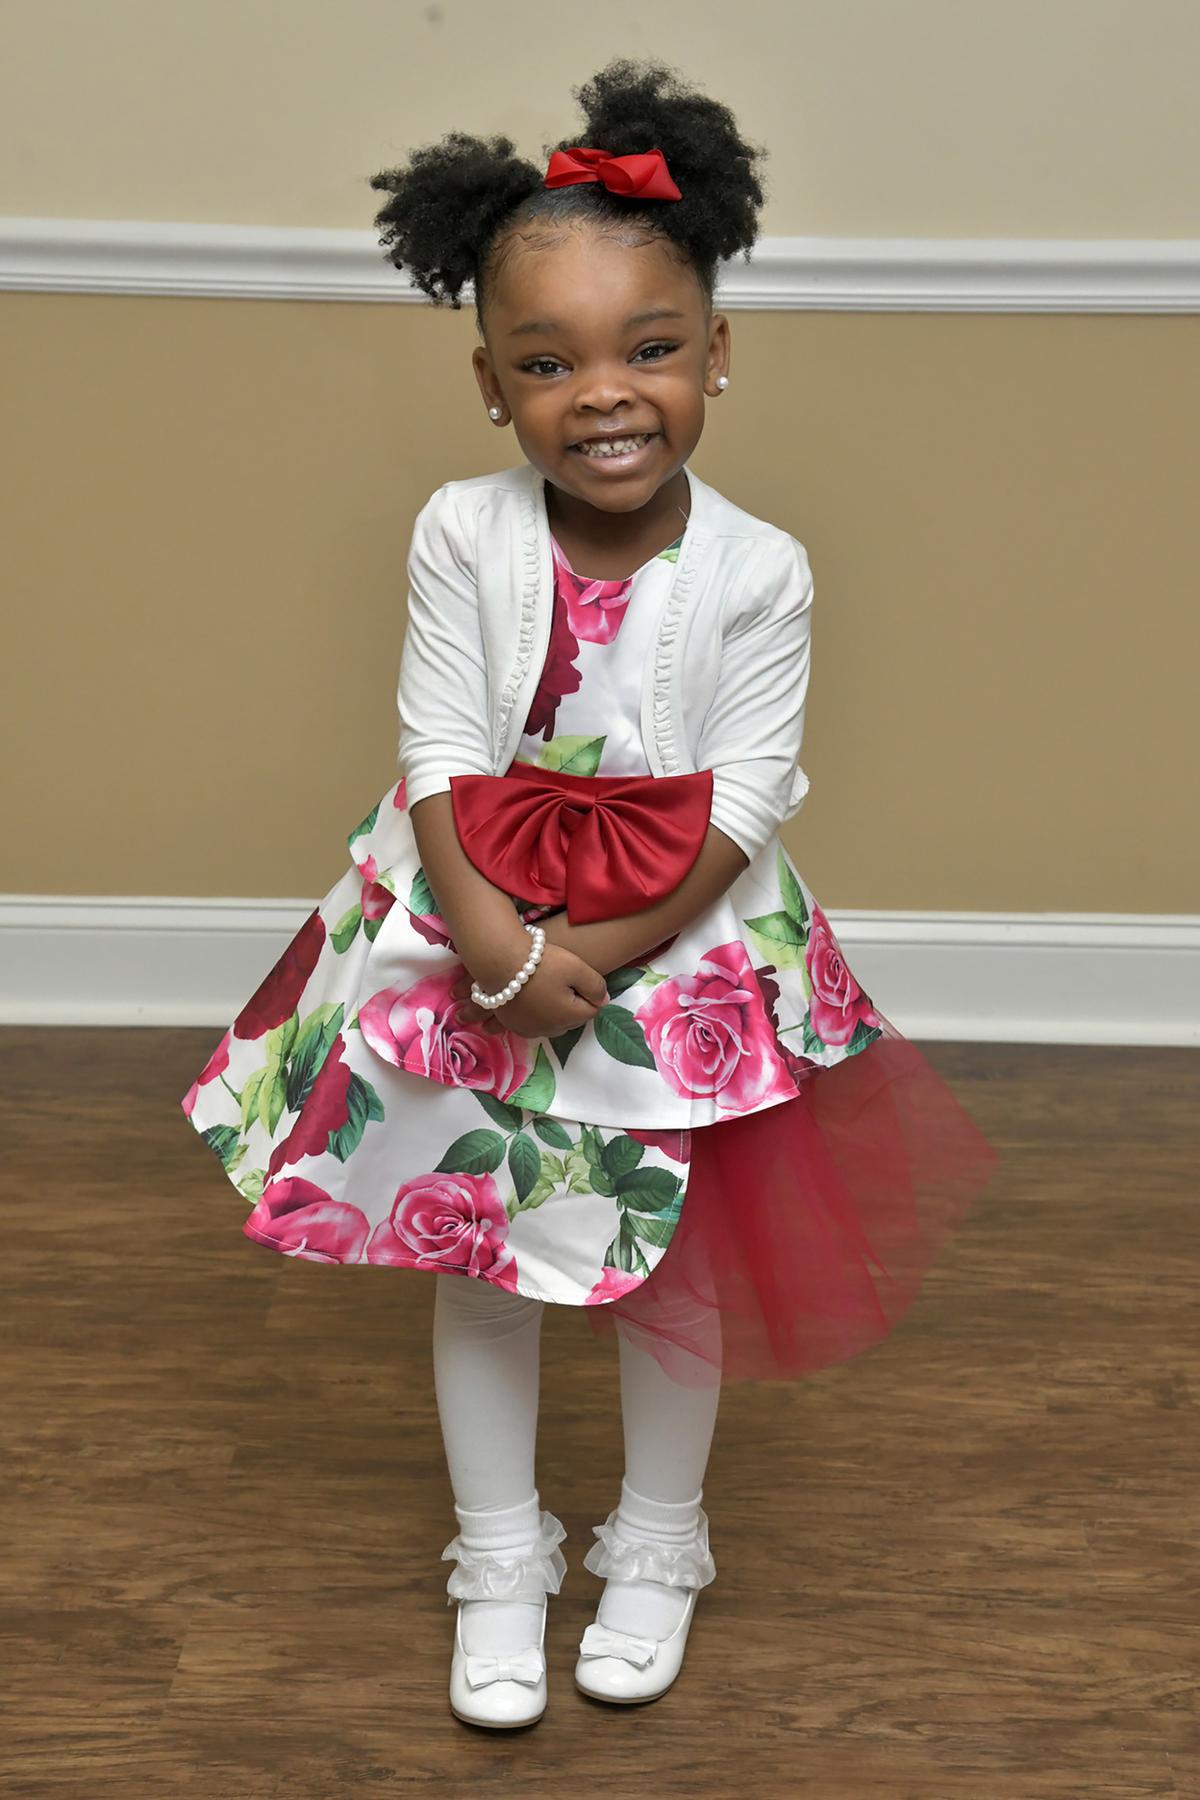 Zena Lee, 4, of Randallstown, attended Palm Sunday services with her mother, Nema Lee, at Rehoboth Ministries Church of God in Christ. Her mother said she has another special dress to wear on Easter. (Amy Davis /Baltimore Sun/TNS)